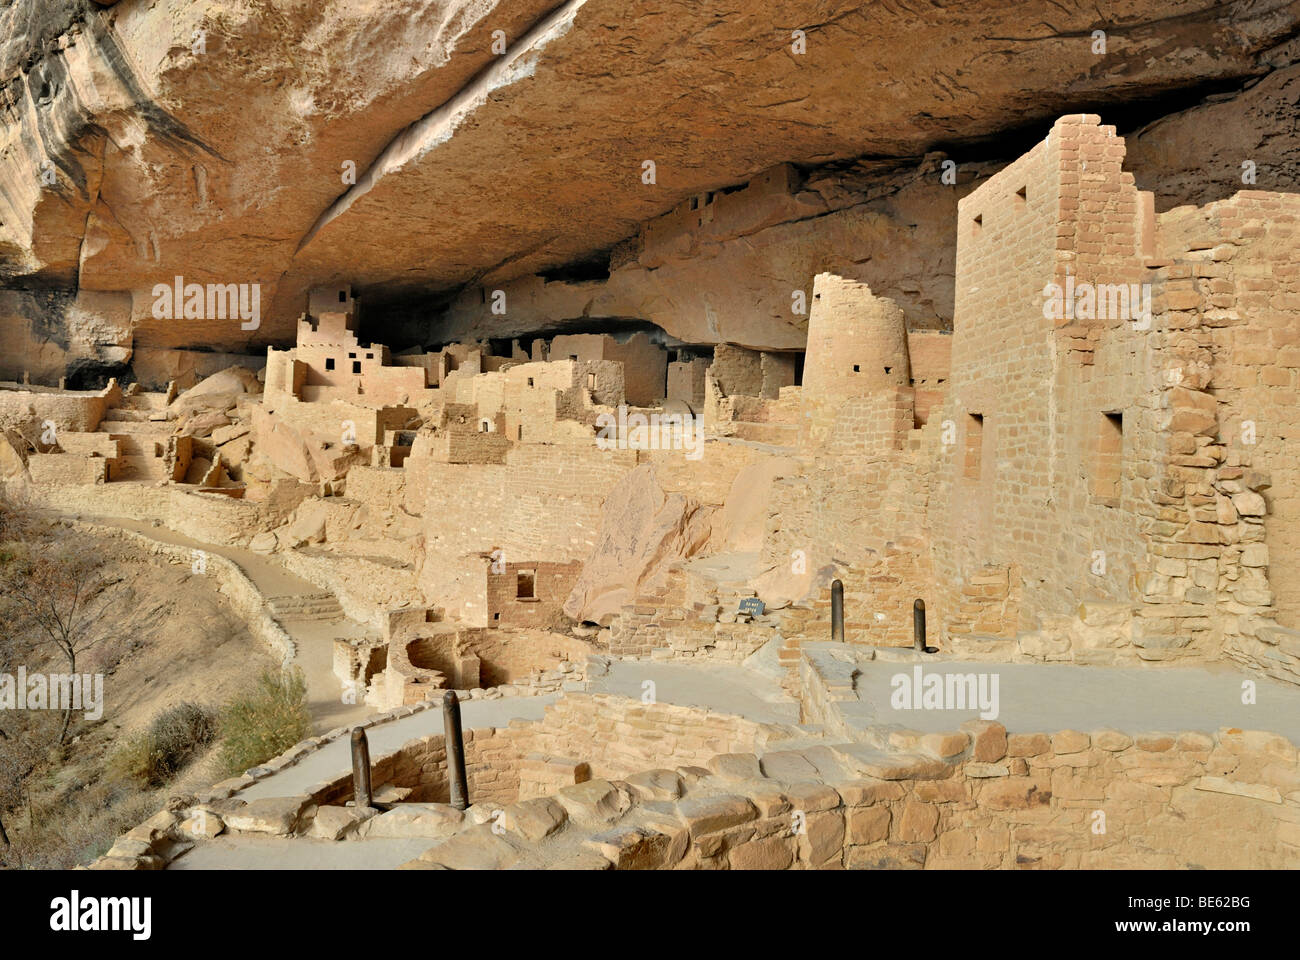 Historic habitation and cult site of the Ancestral Puebloans, Cliff Palace, partial view, about 1200 AD, partially reconstructe Stock Photo